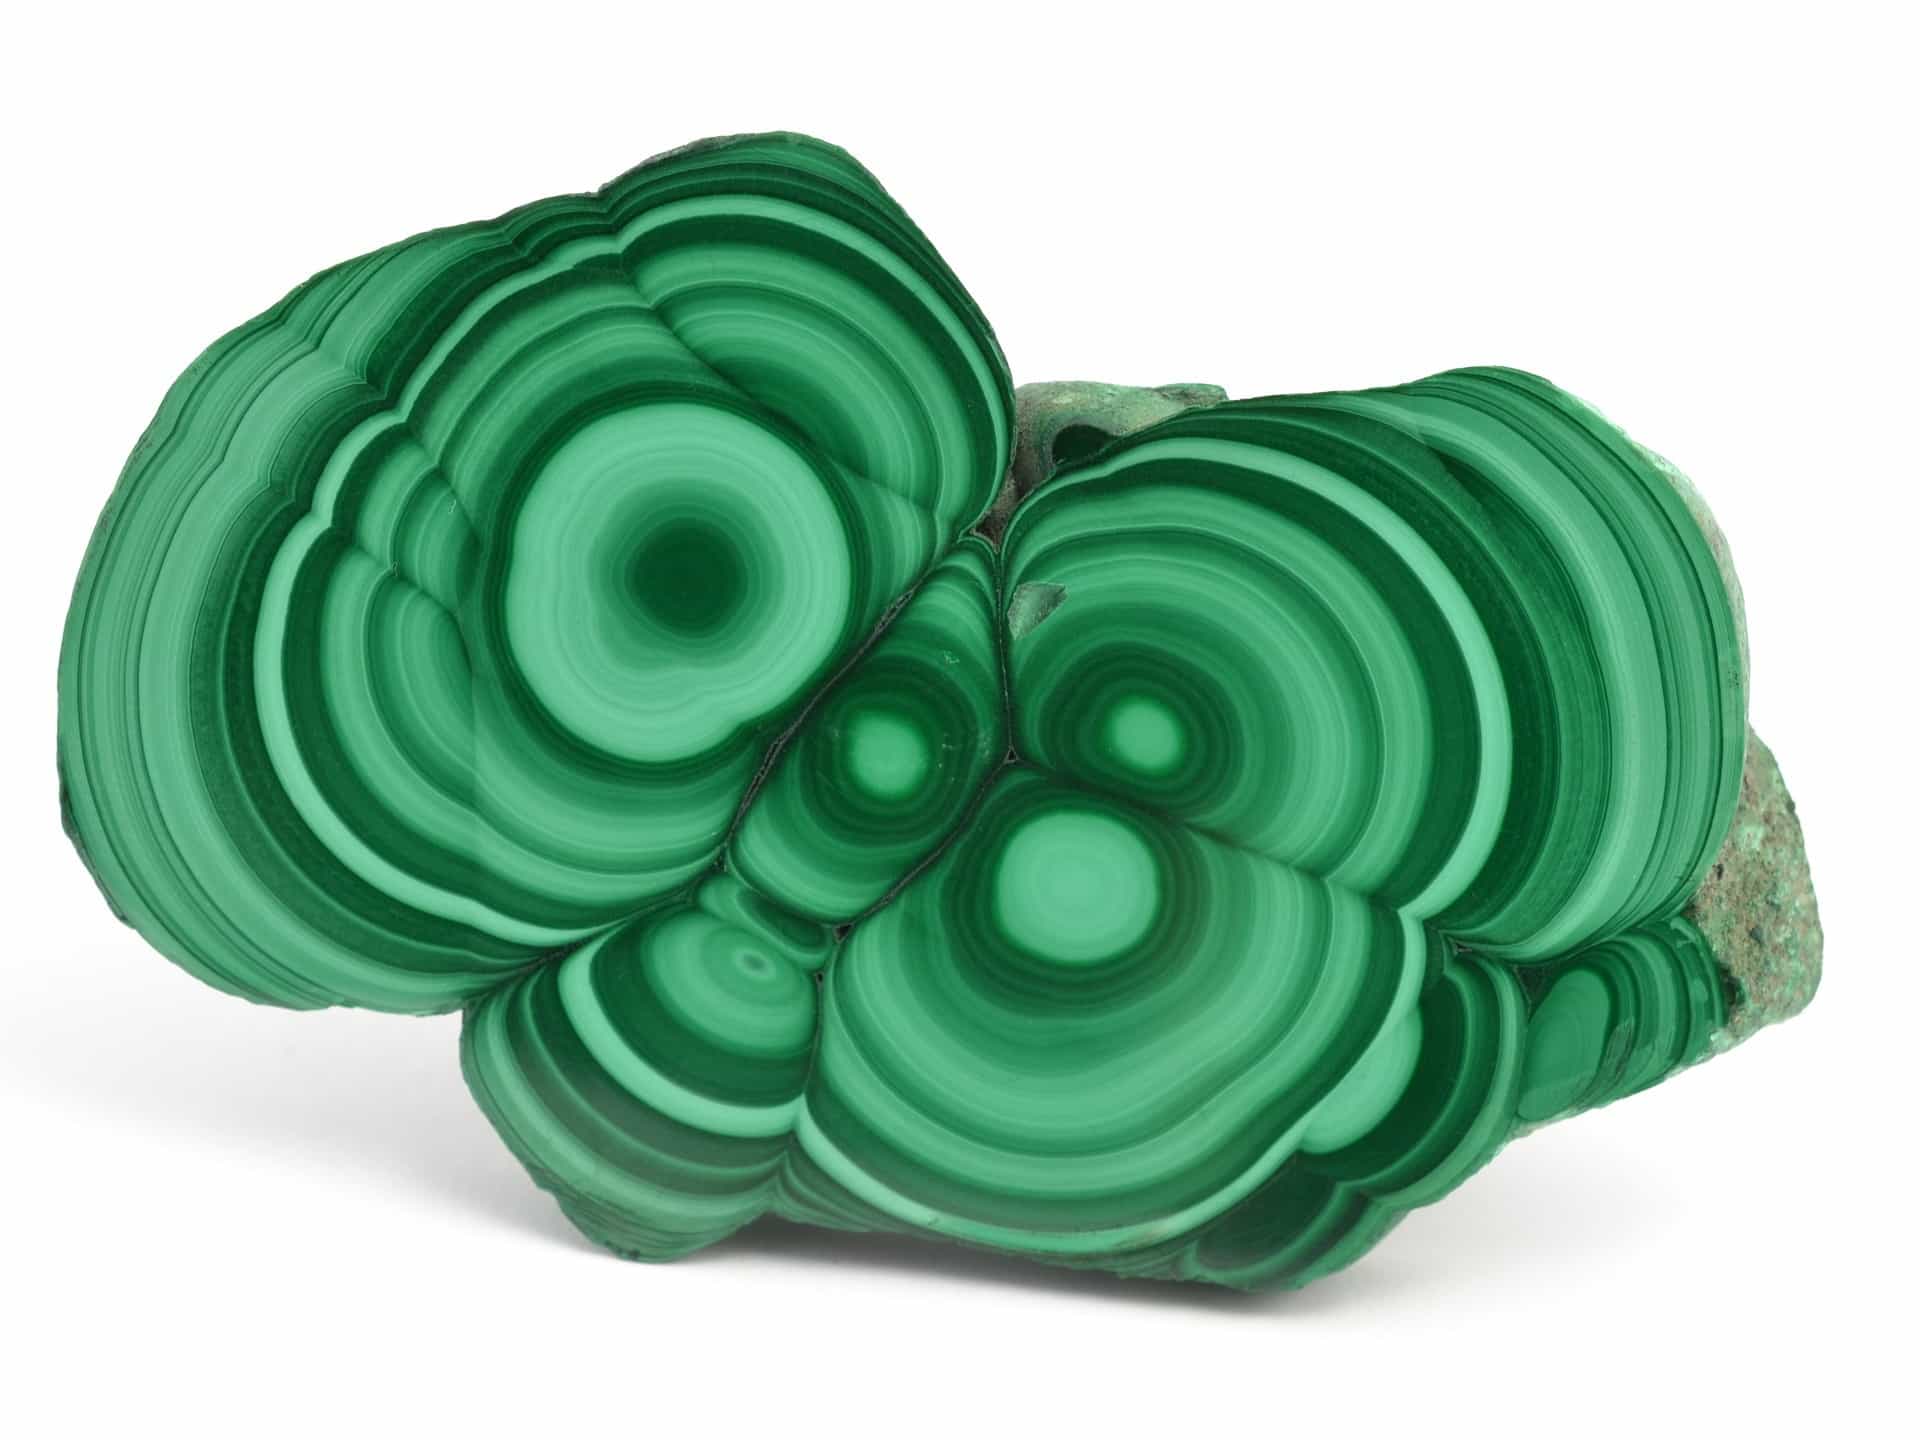 100% Natural African Green Malachite,Natural Gemstone,Malachite Cabochon,Loose Gemstone Malachite Cabochon For make Jewellry,Green Stone,